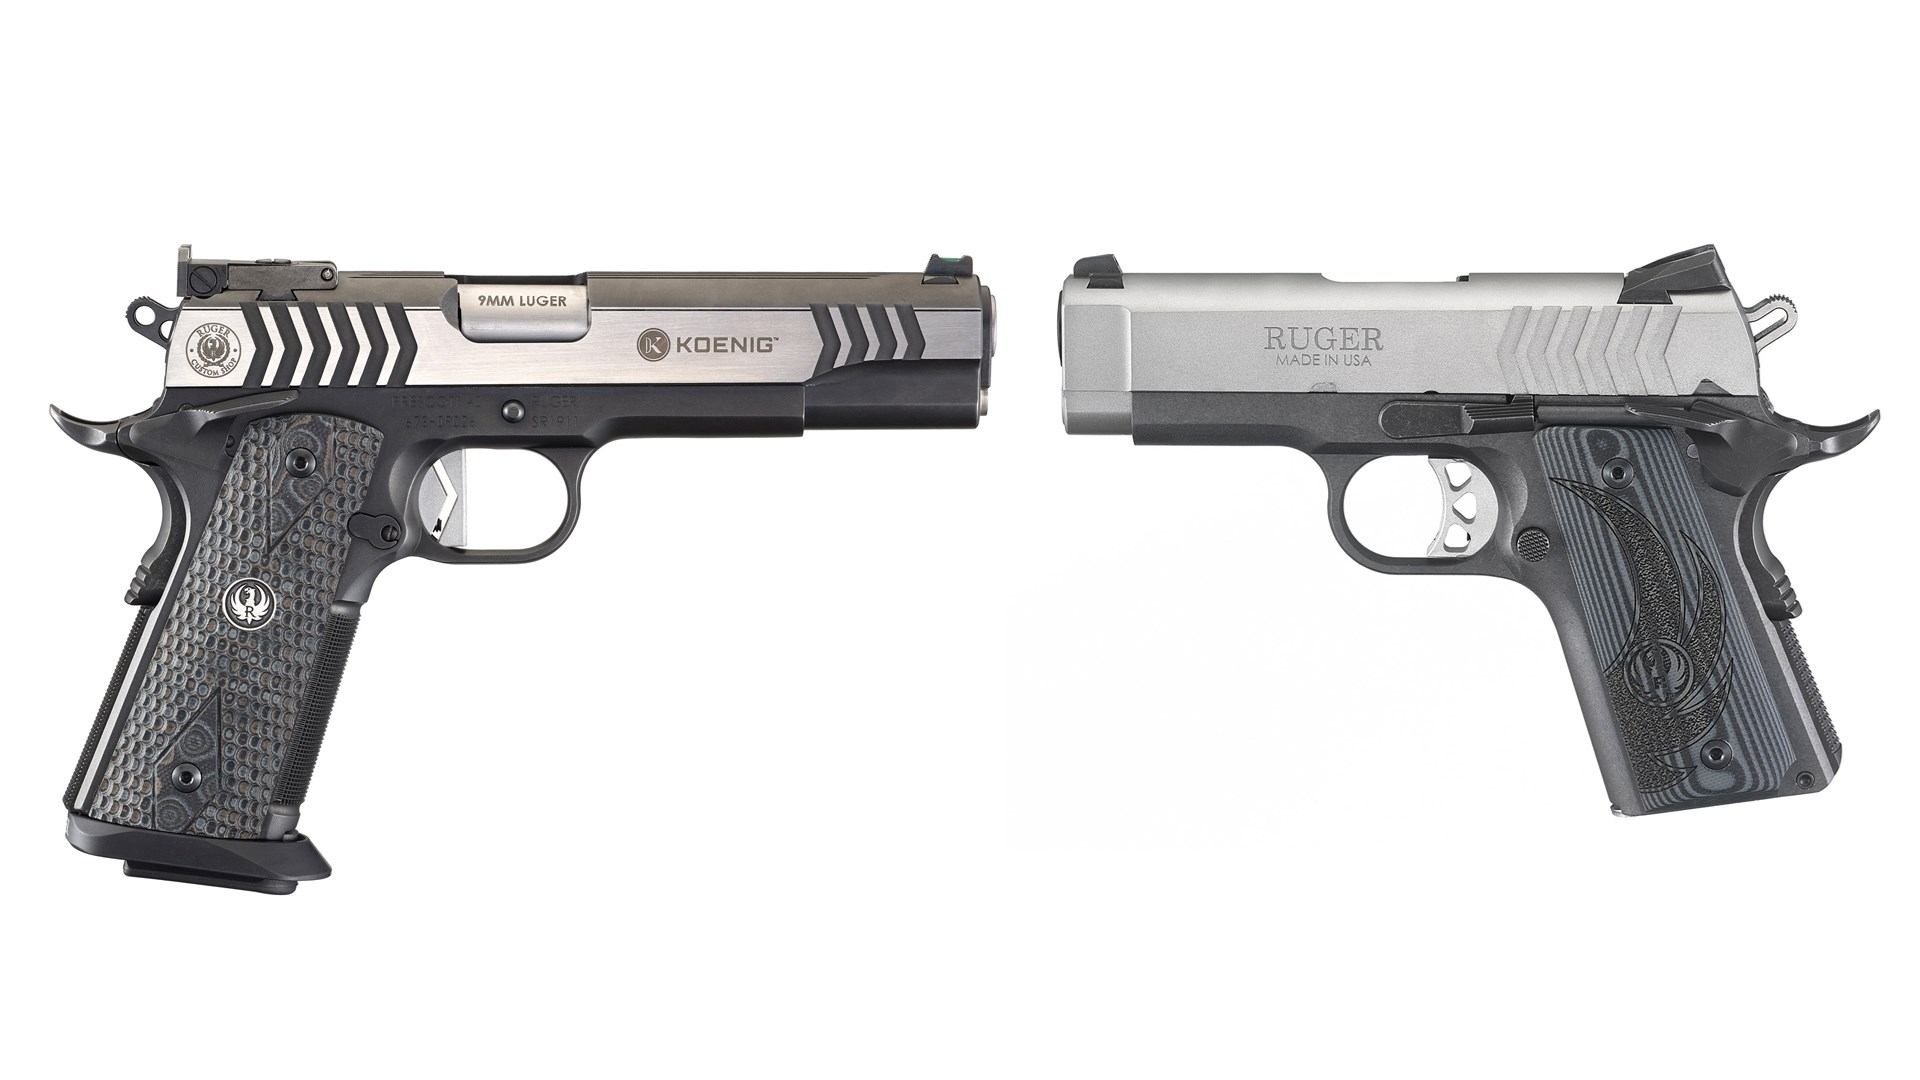 A full-size Ruger SR1911 compared to a compact SR1911.